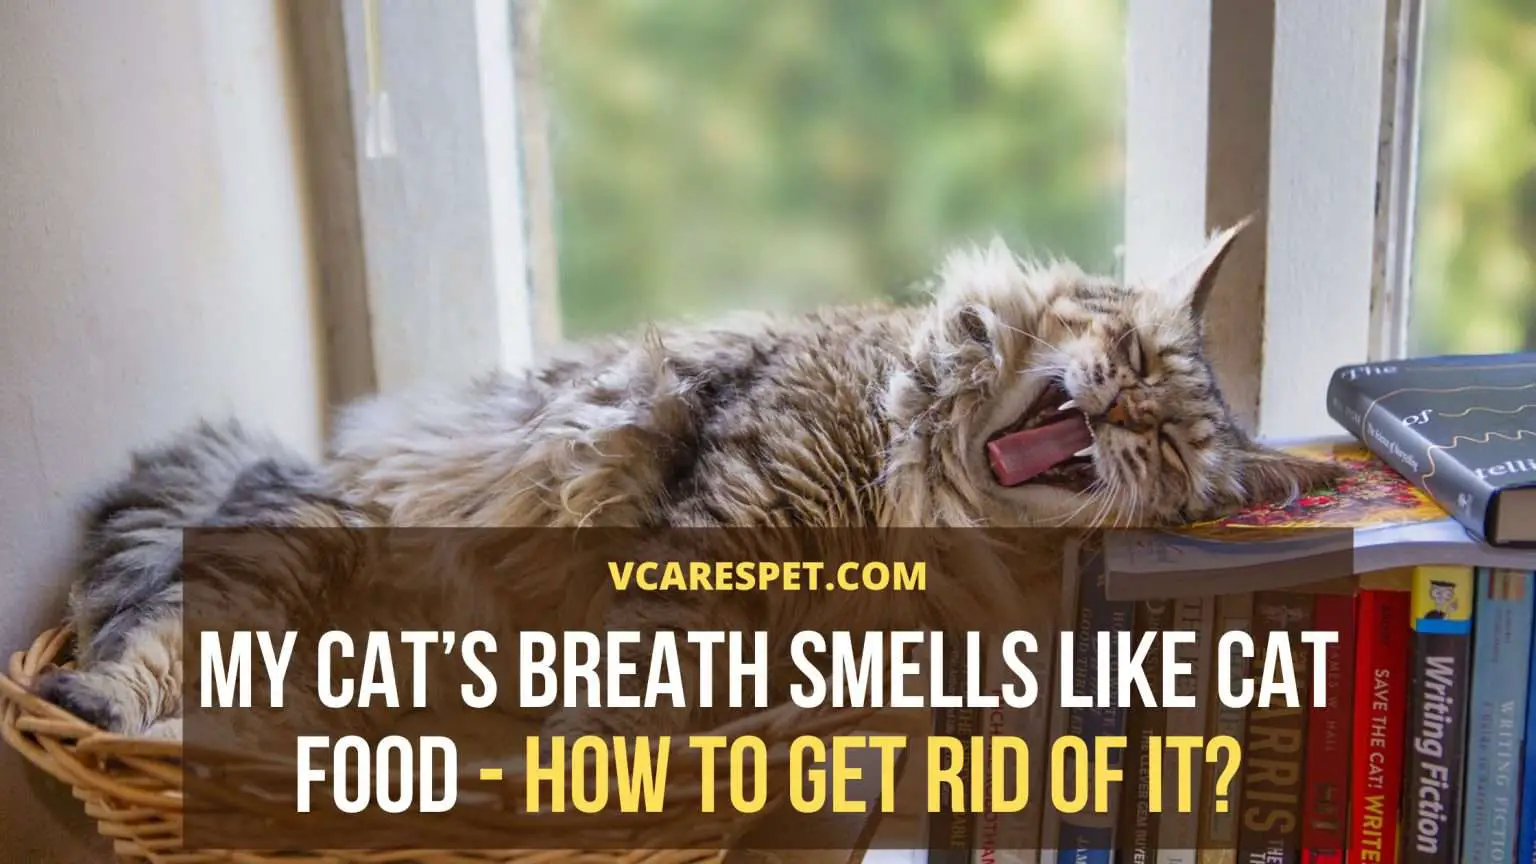 My Cat’s Breath Smells Like Cat Food How To Get Rid Of It? VCaresPet